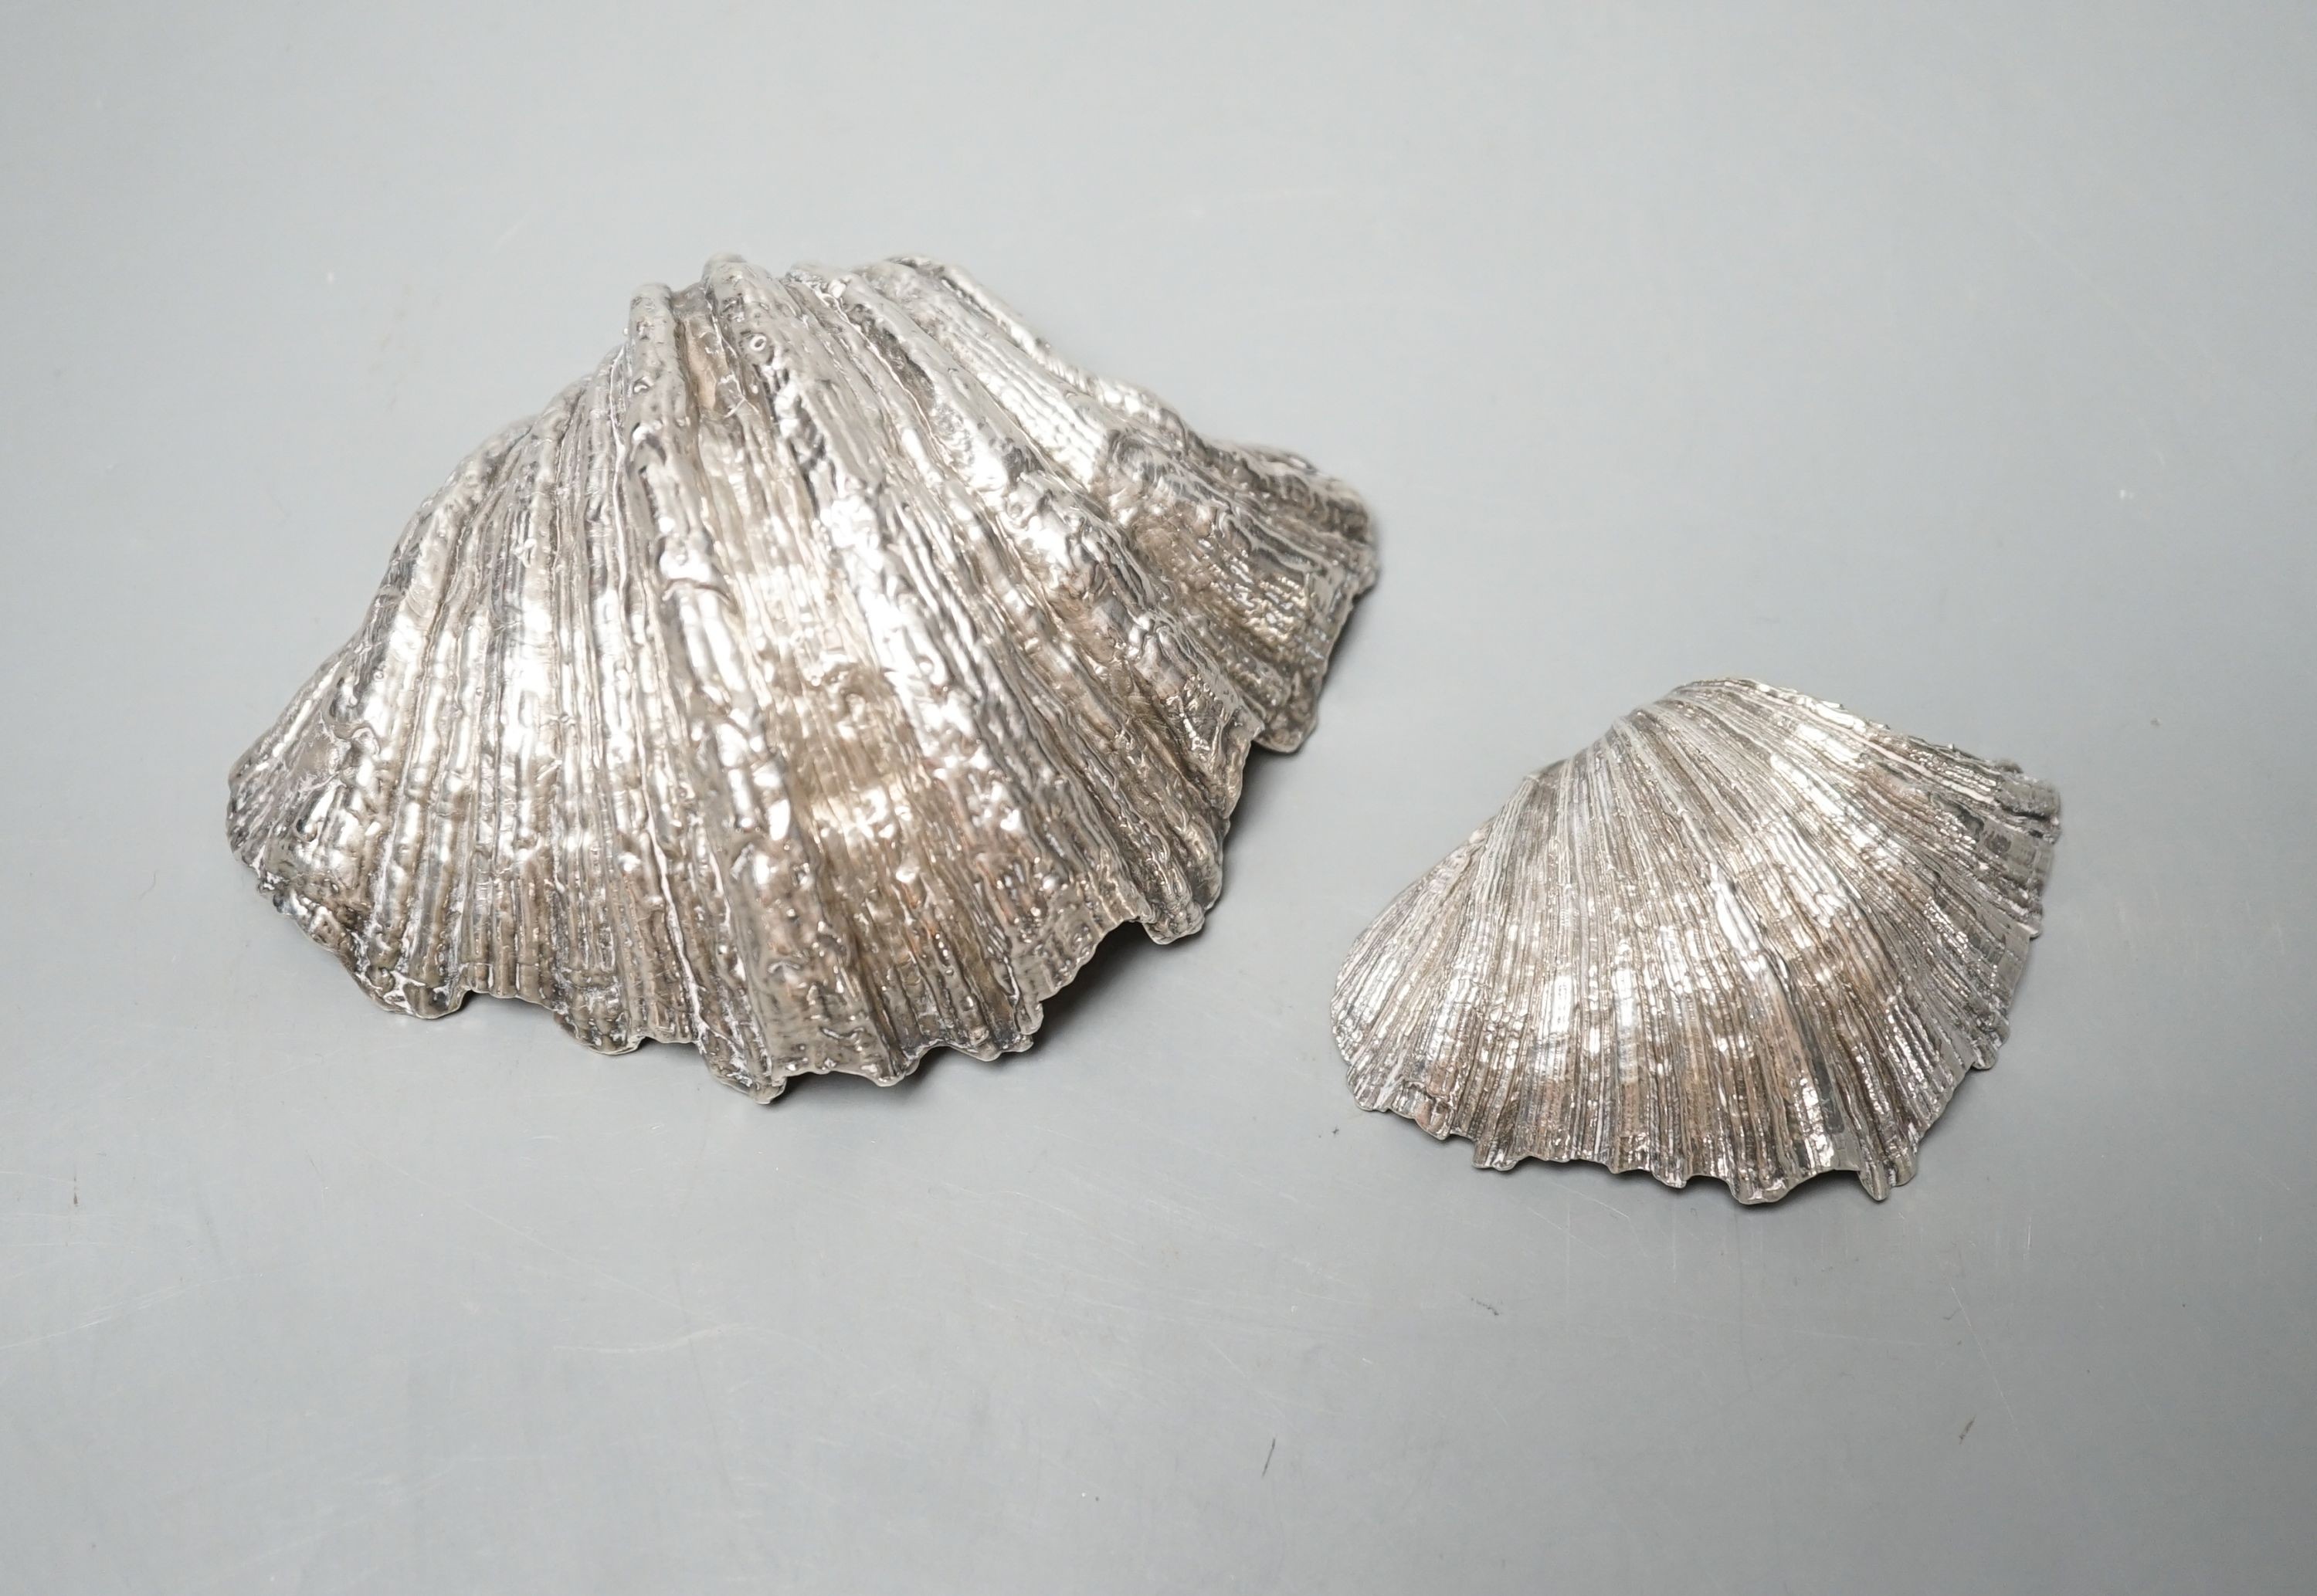 Two modern cast silver shell dishes, Patricia Jean Hamilton, London, 1991, largest 12.9cm, 18.5oz.